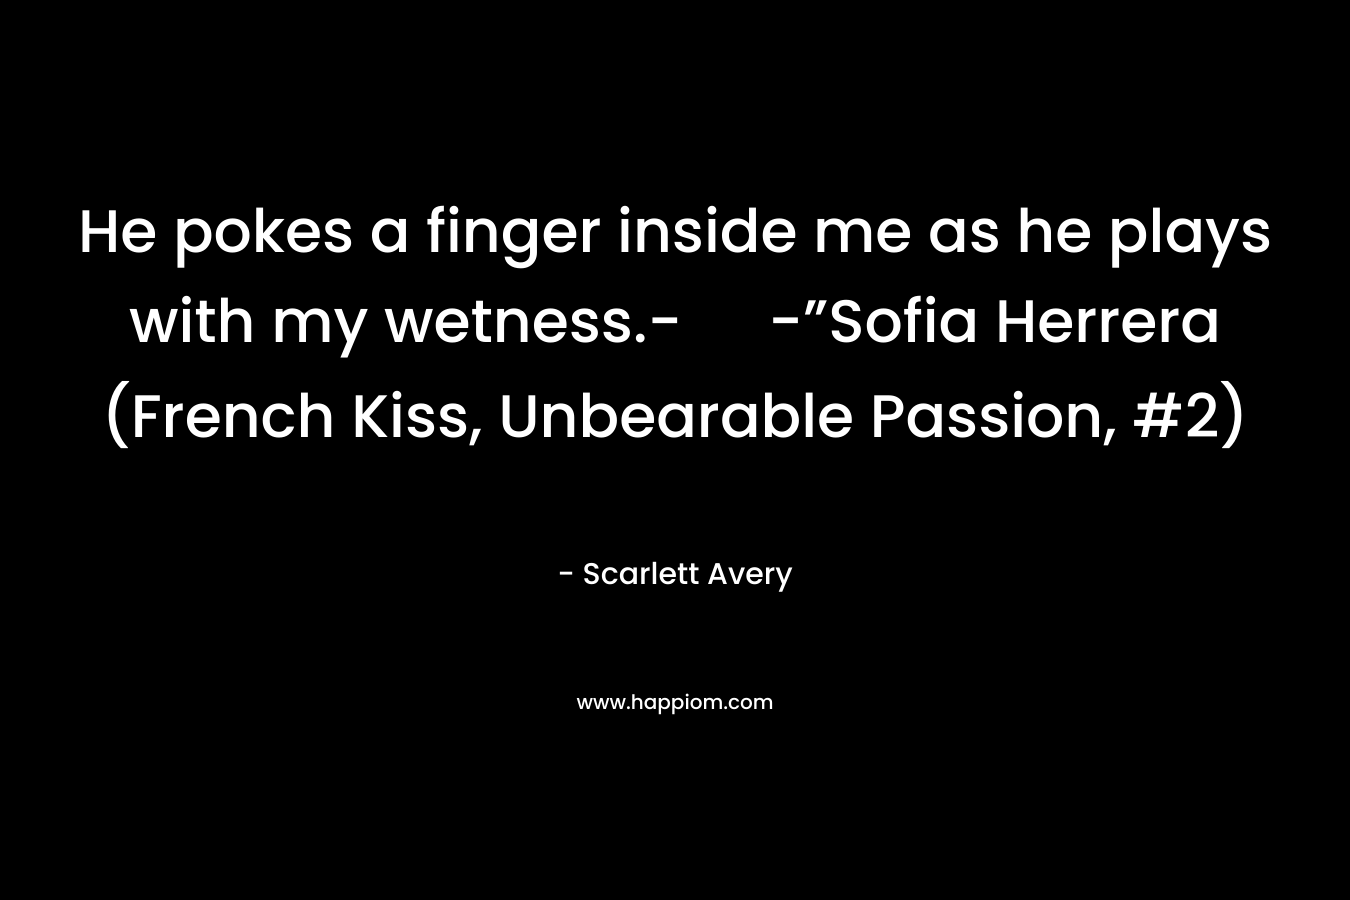 He pokes a finger inside me as he plays with my wetness.- -”Sofia Herrera (French Kiss, Unbearable Passion, #2) – Scarlett Avery